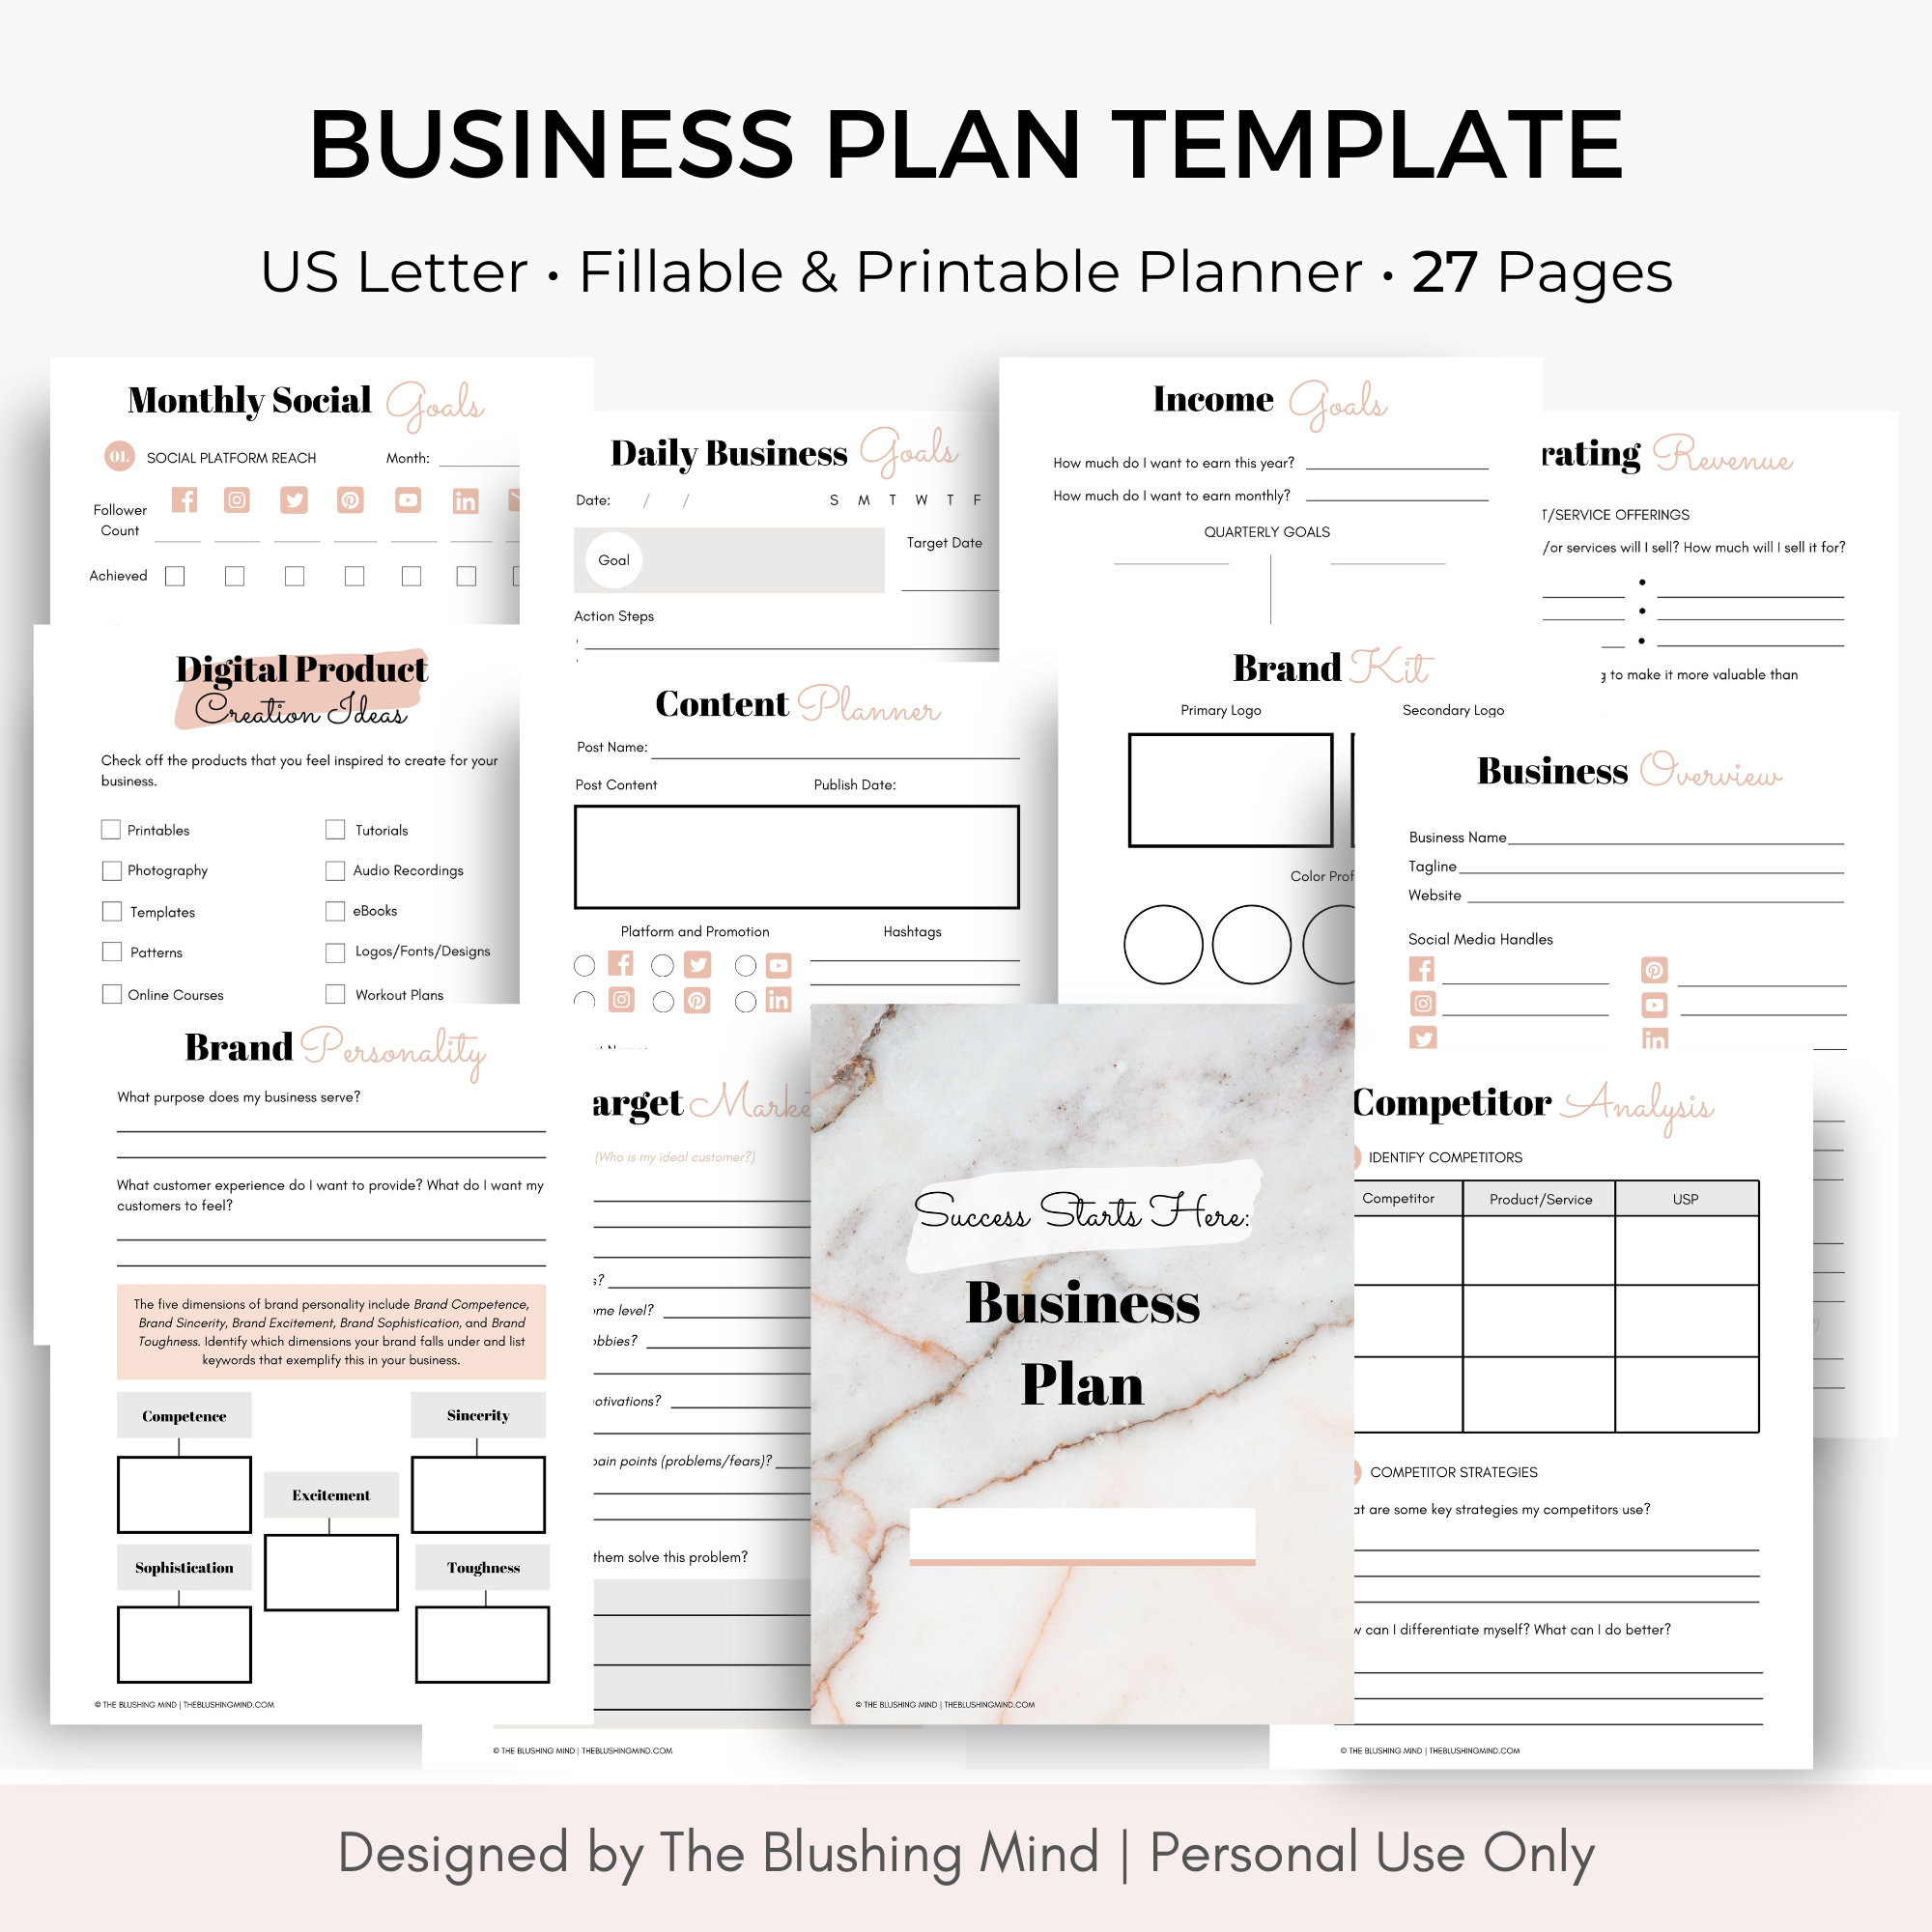 Business Plan Template: Business Planner, Small Business, Online Business,  Printable PDF, Fillable Planner, Fillable PDF -  UK